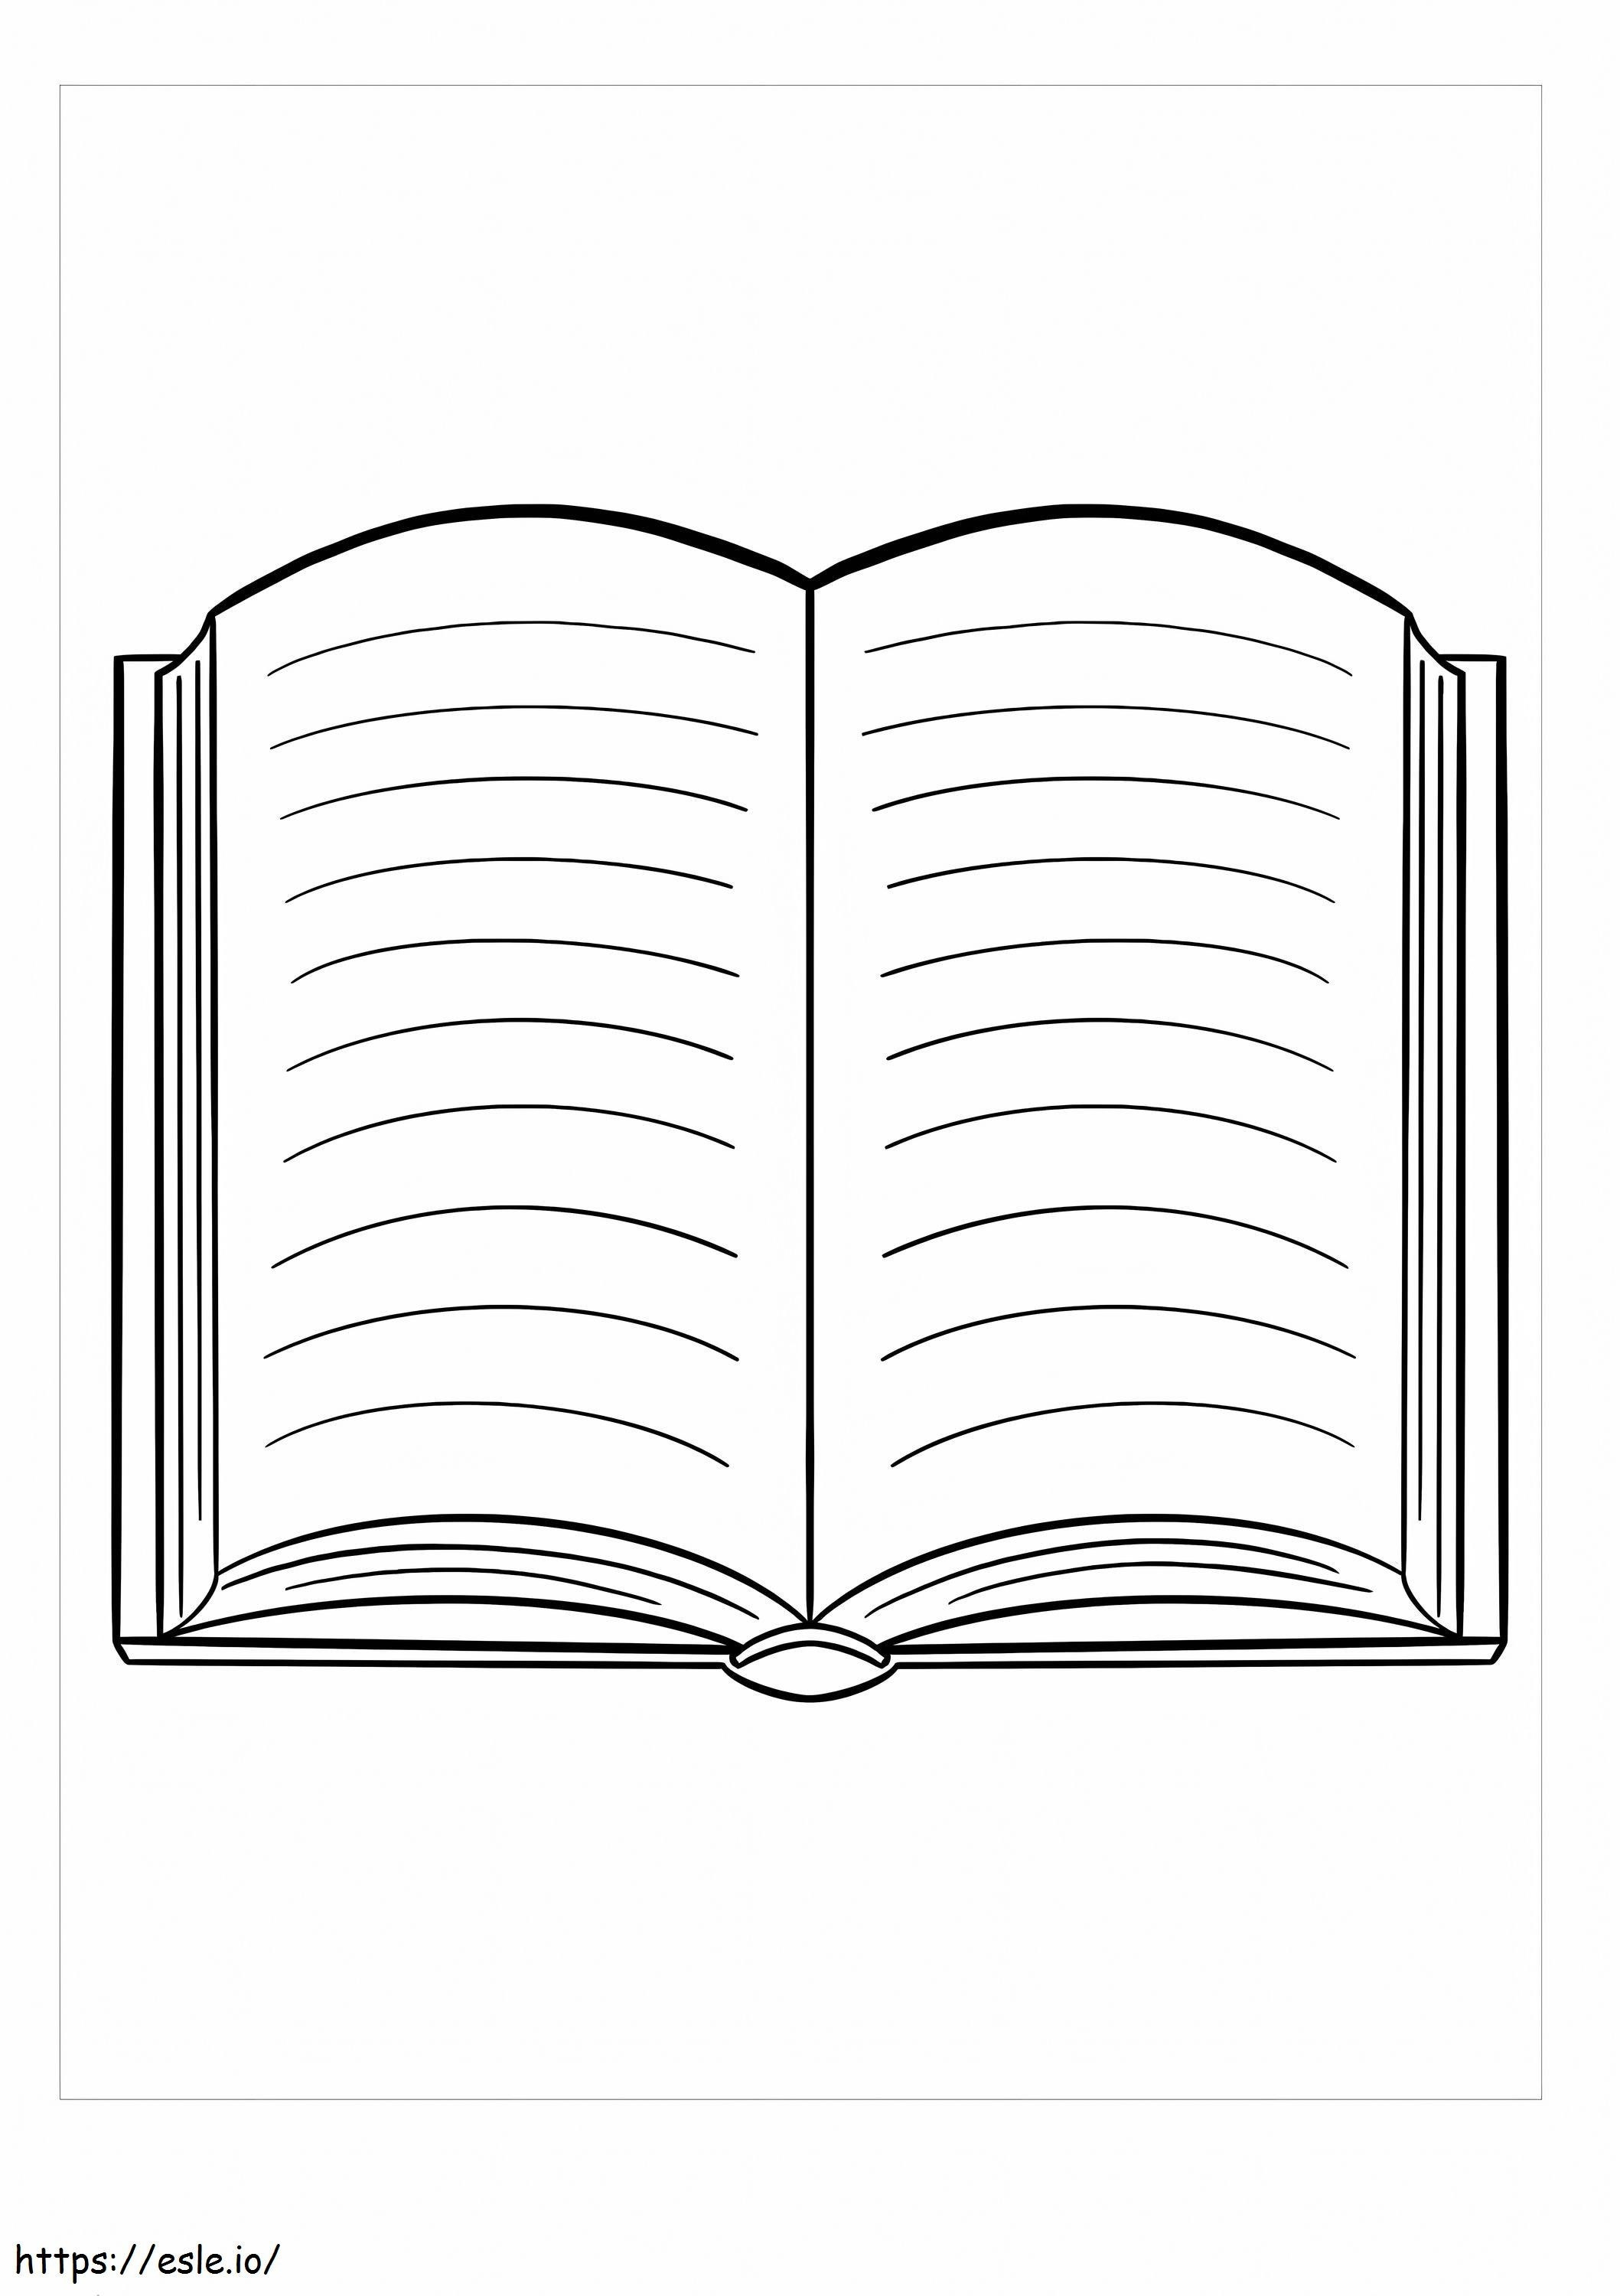 Basic Open Book coloring page